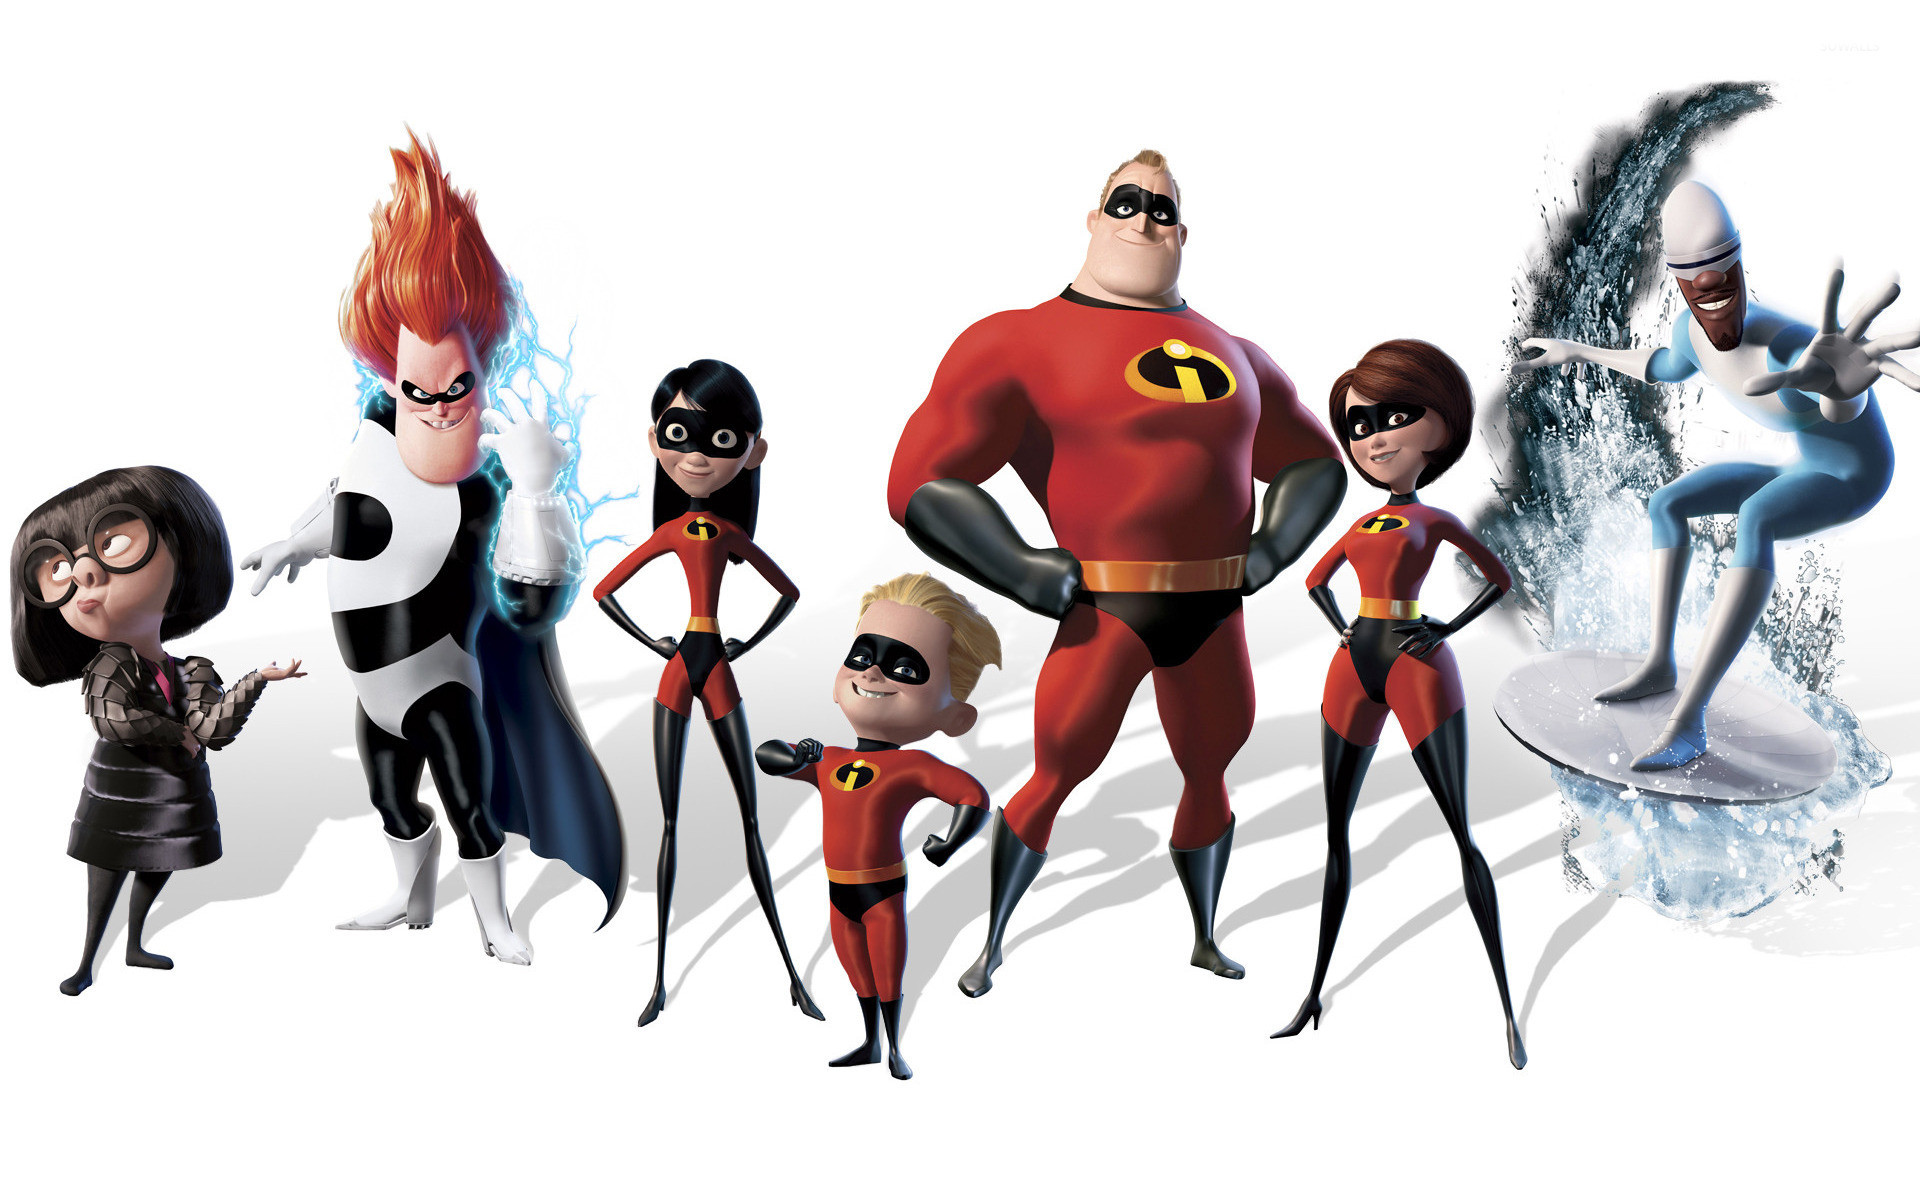 1920x1200 The Incredibles wallpaper